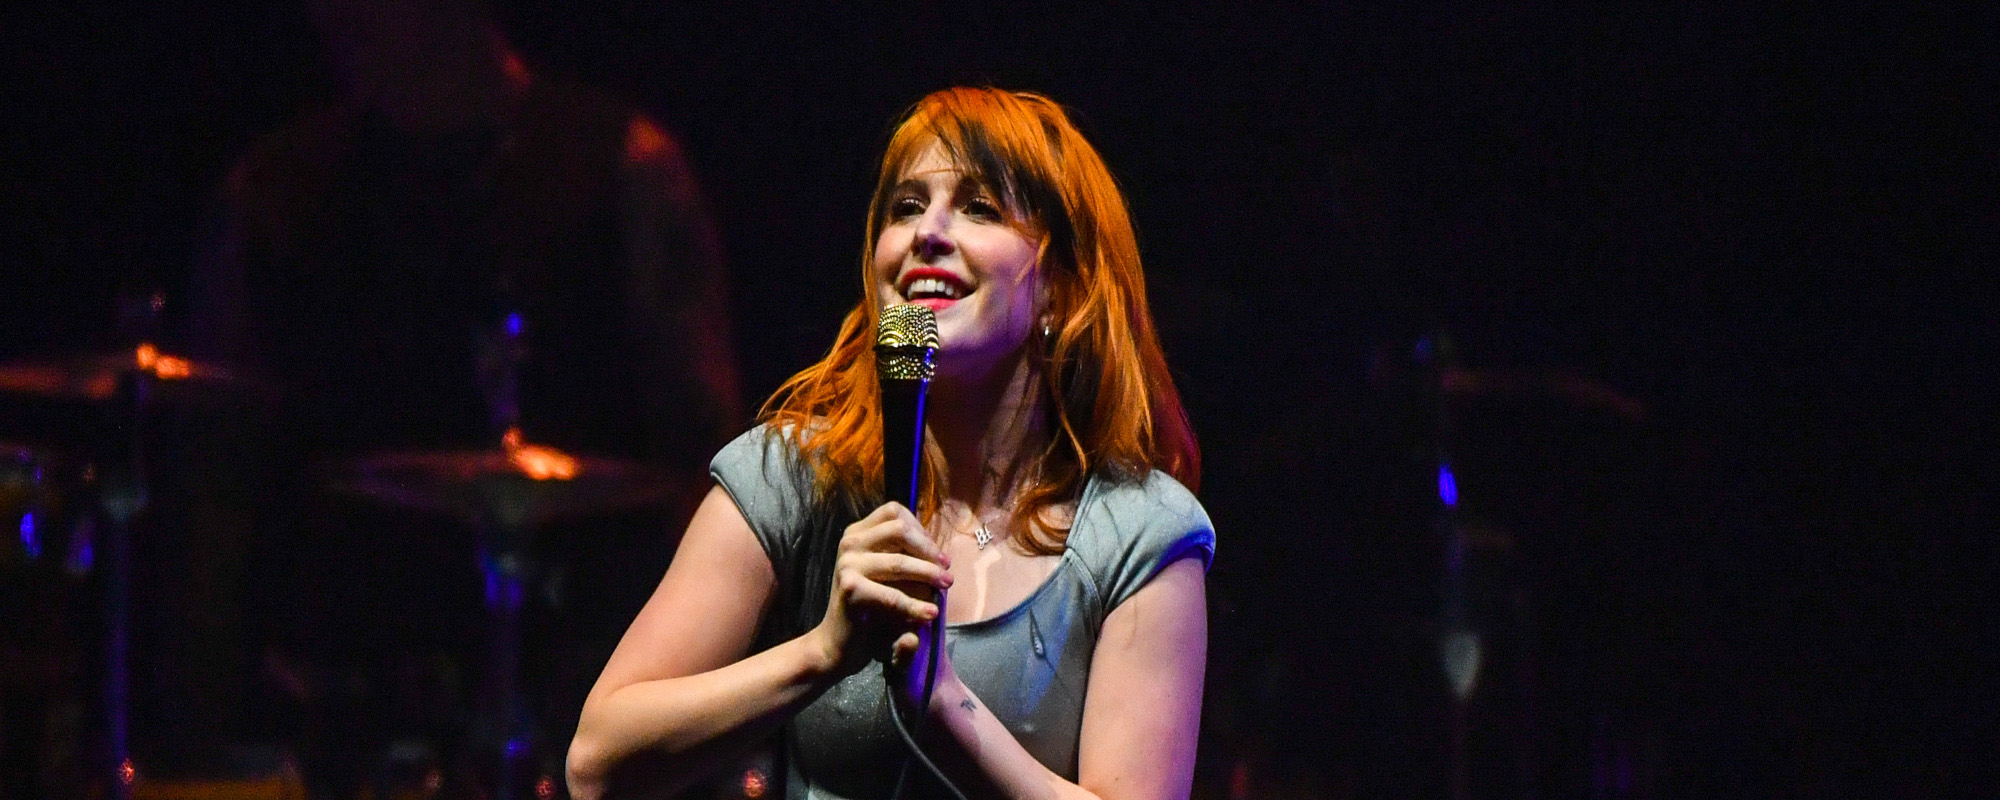 5 Things to Know About Paramore’s Hayley Williams